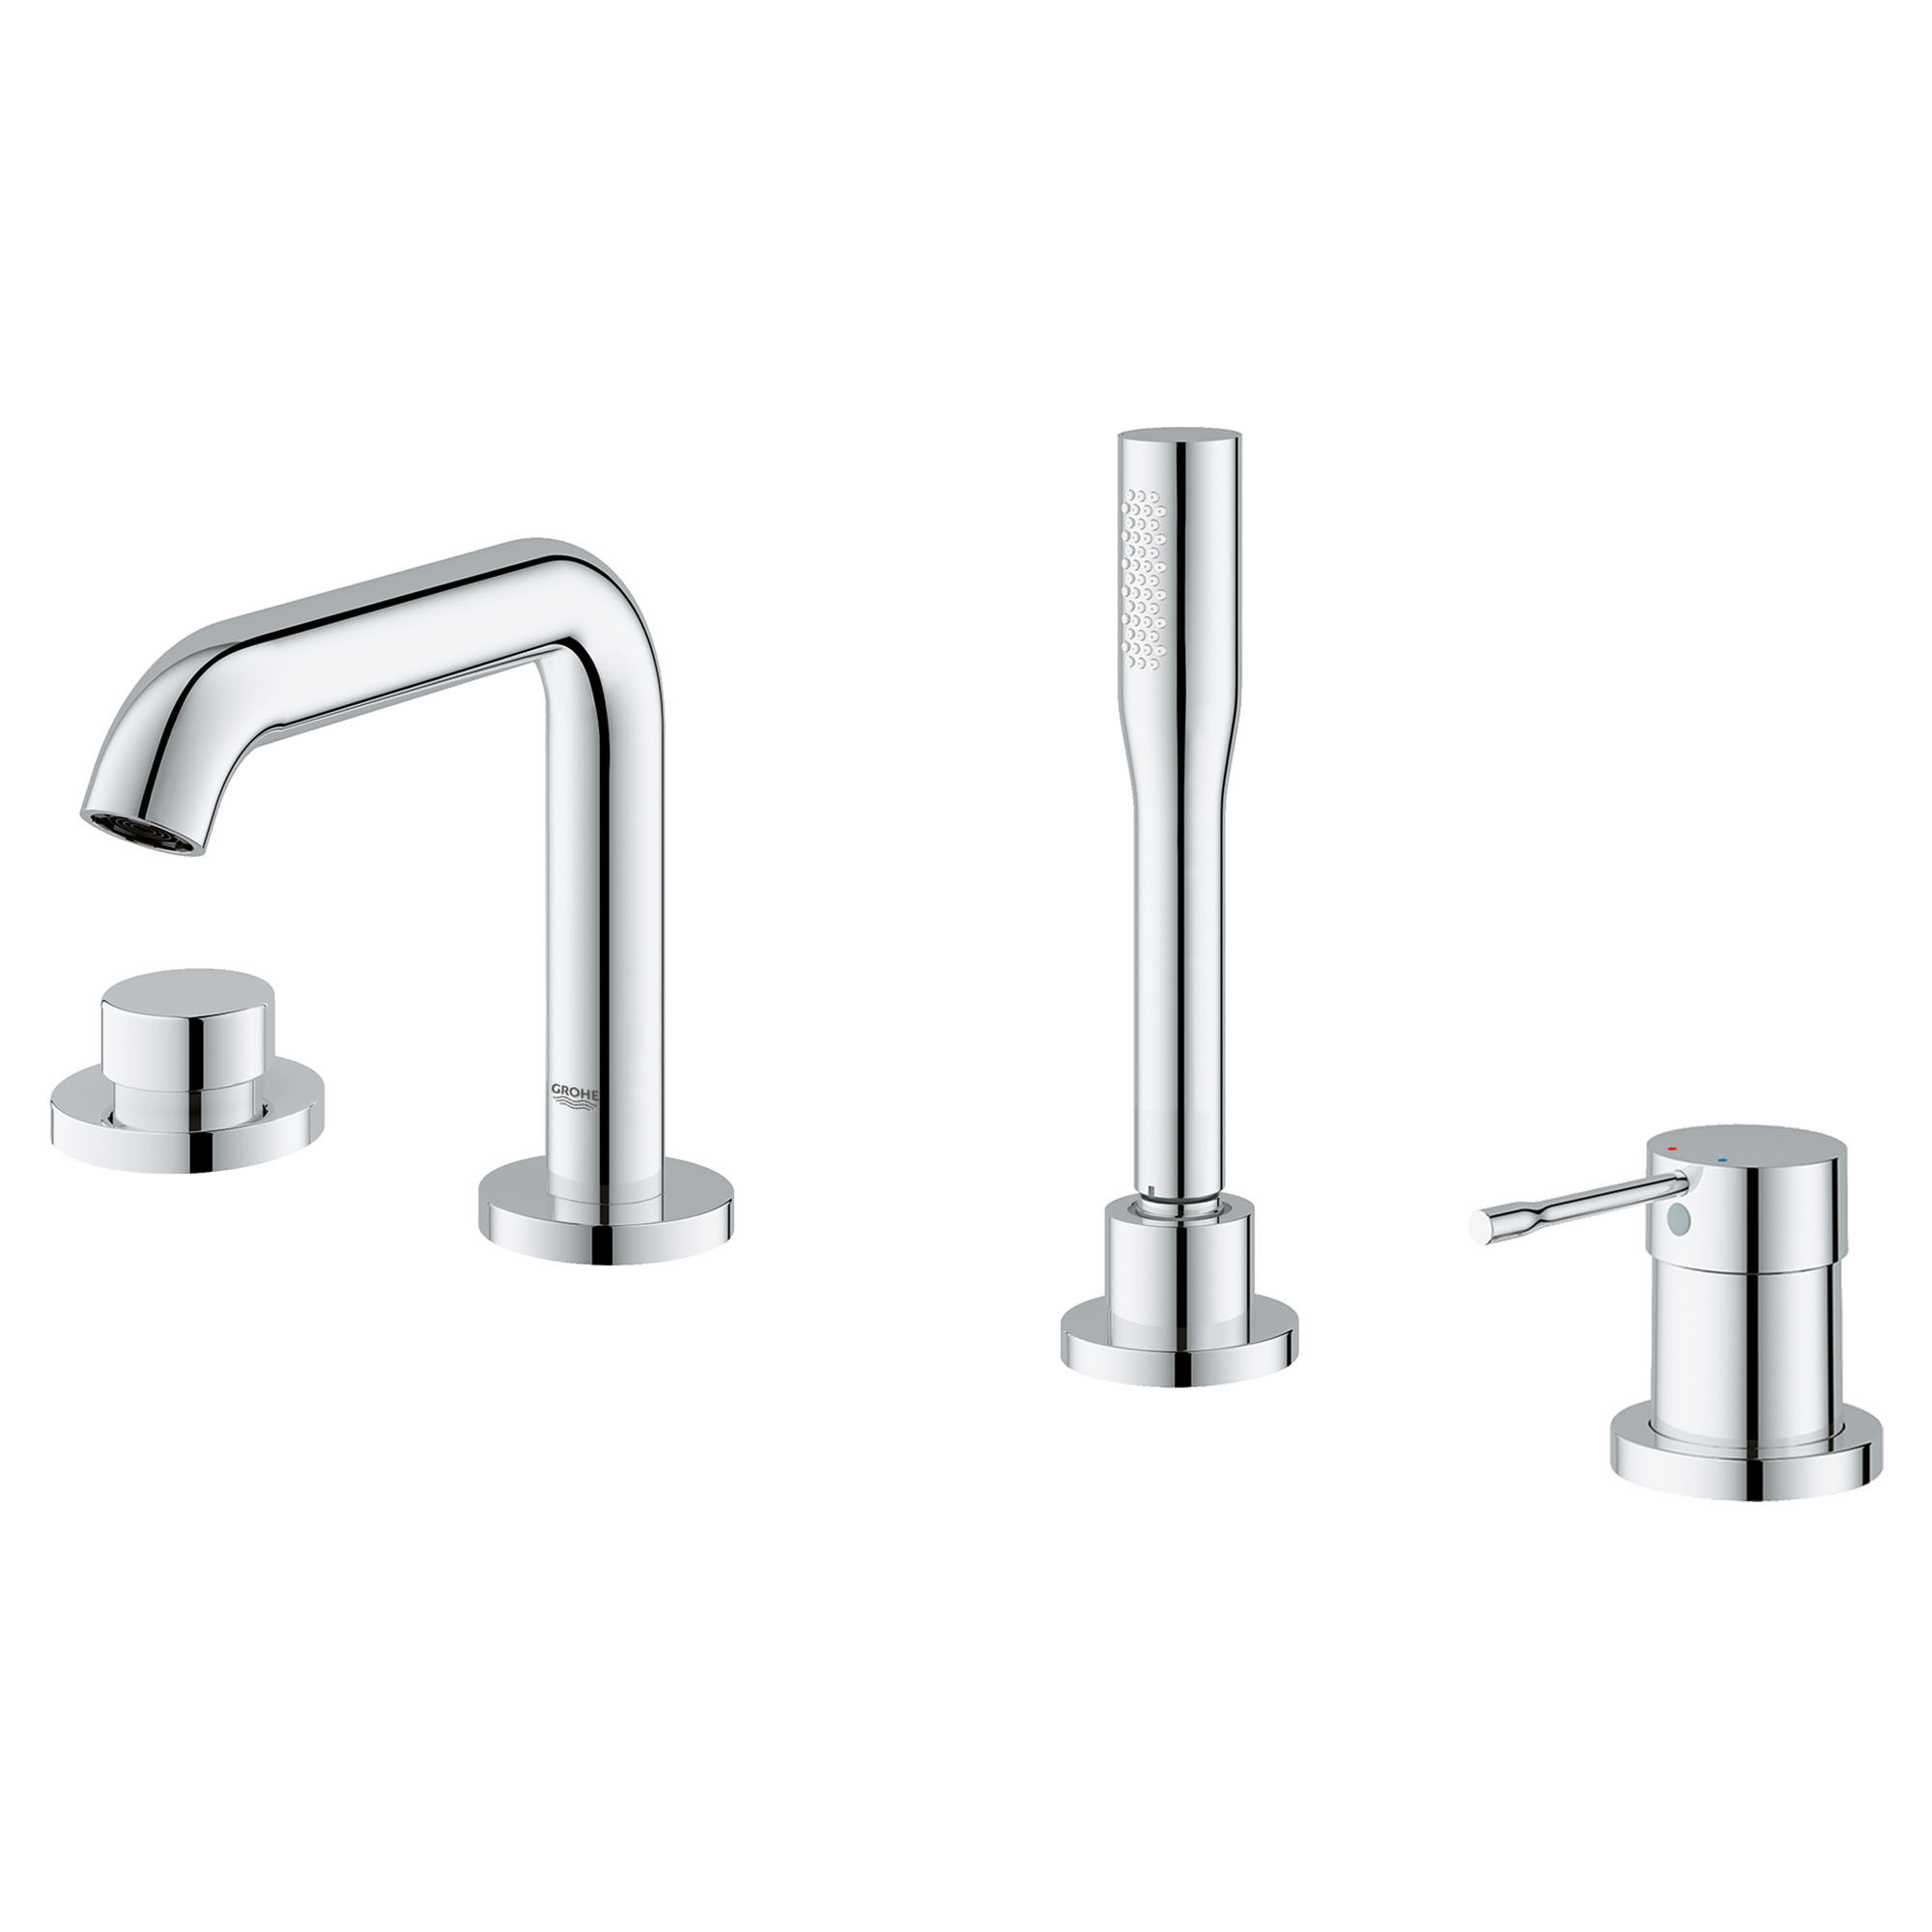 4-Hole Single-Handle Deck Mount Roman Tub Faucet with 6.6 L/min (1.75 gpm) Hand Shower